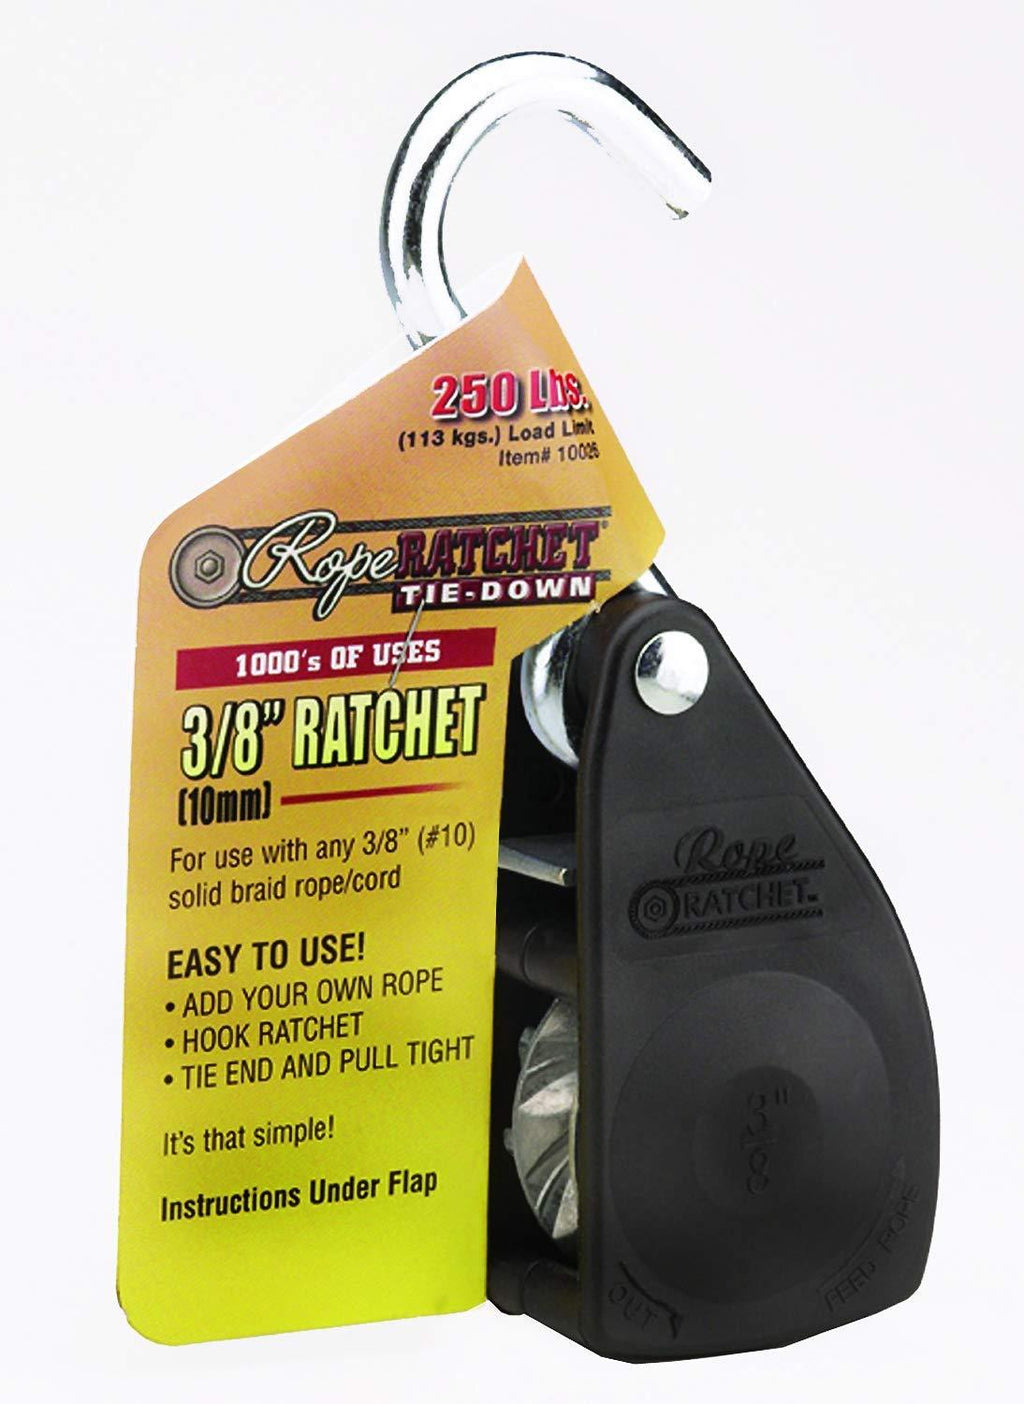  [AUSTRALIA] - Rope Ratchet 10026 Ratcheting Tie Down Rope Hanger Pulley, 3/8" 250lb Weigh Capacity Only, As Pictured Up to 250 lbs